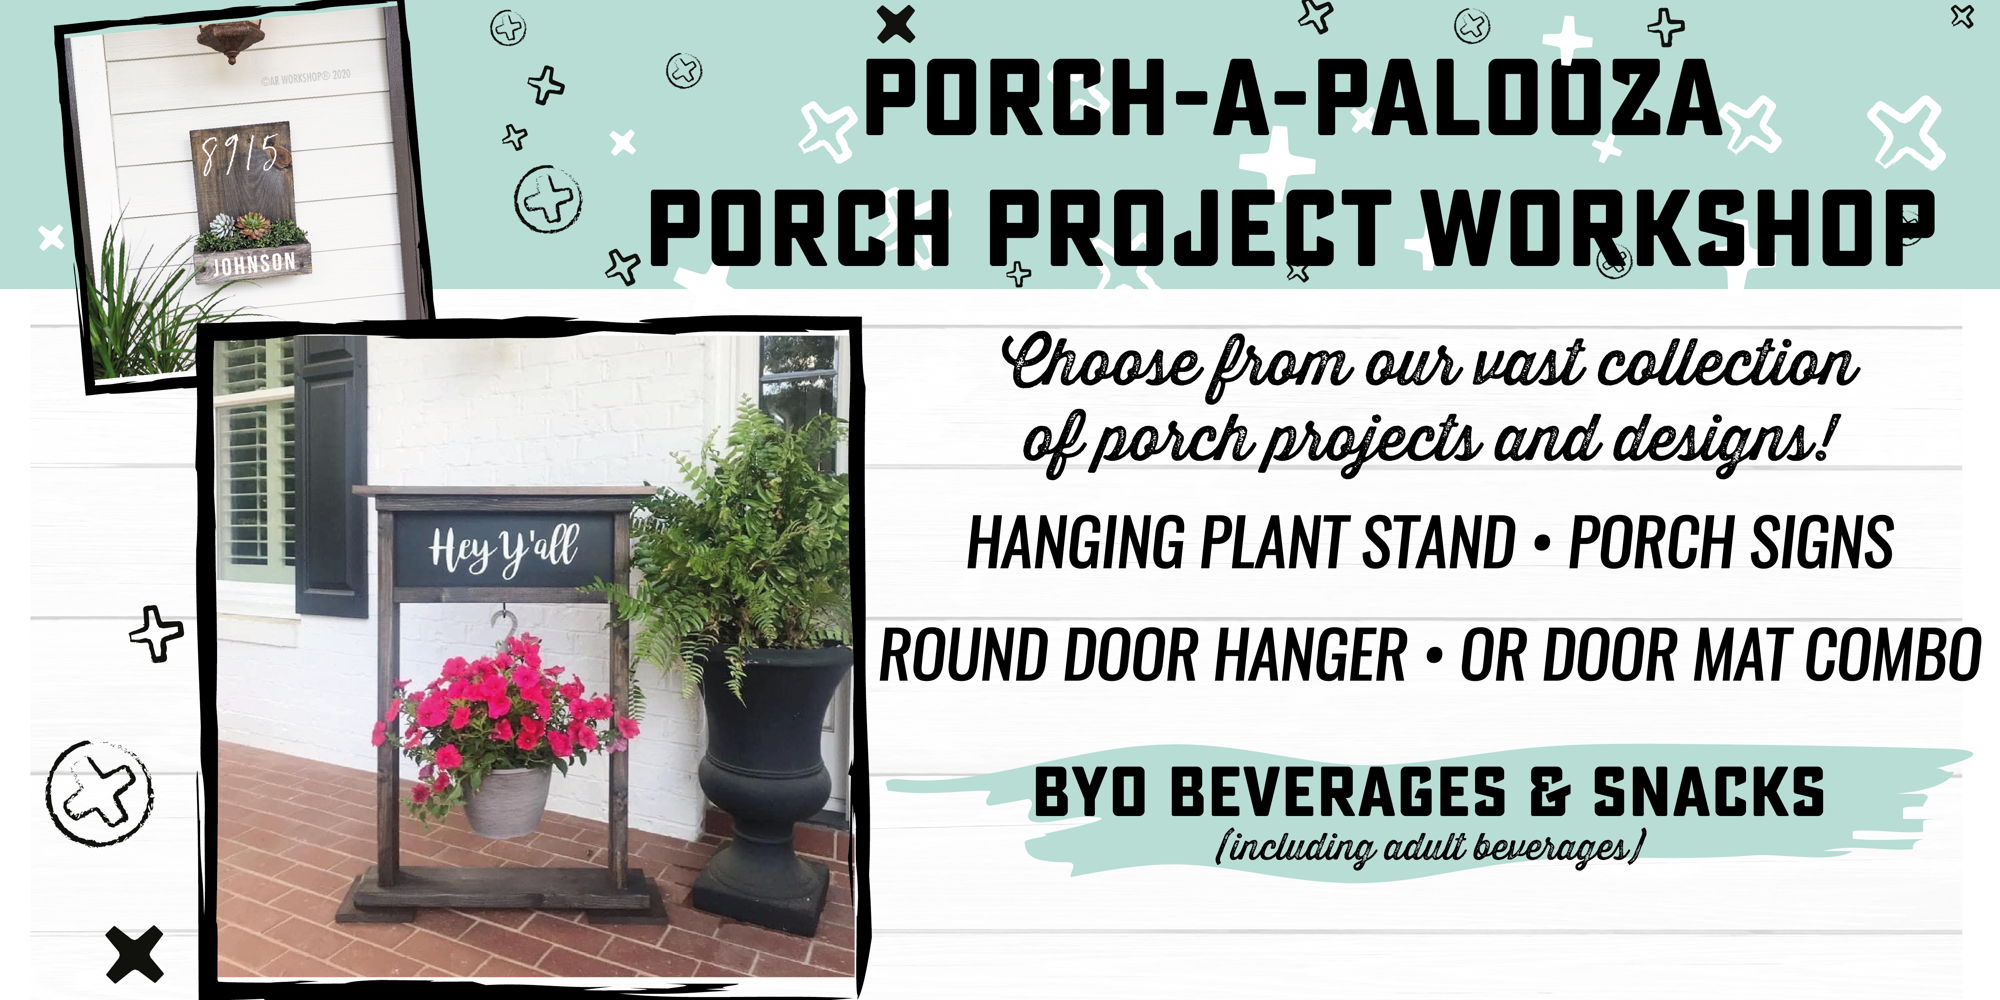 Specialty - Porch-a-palooza - Porch Project Workshop promotional image